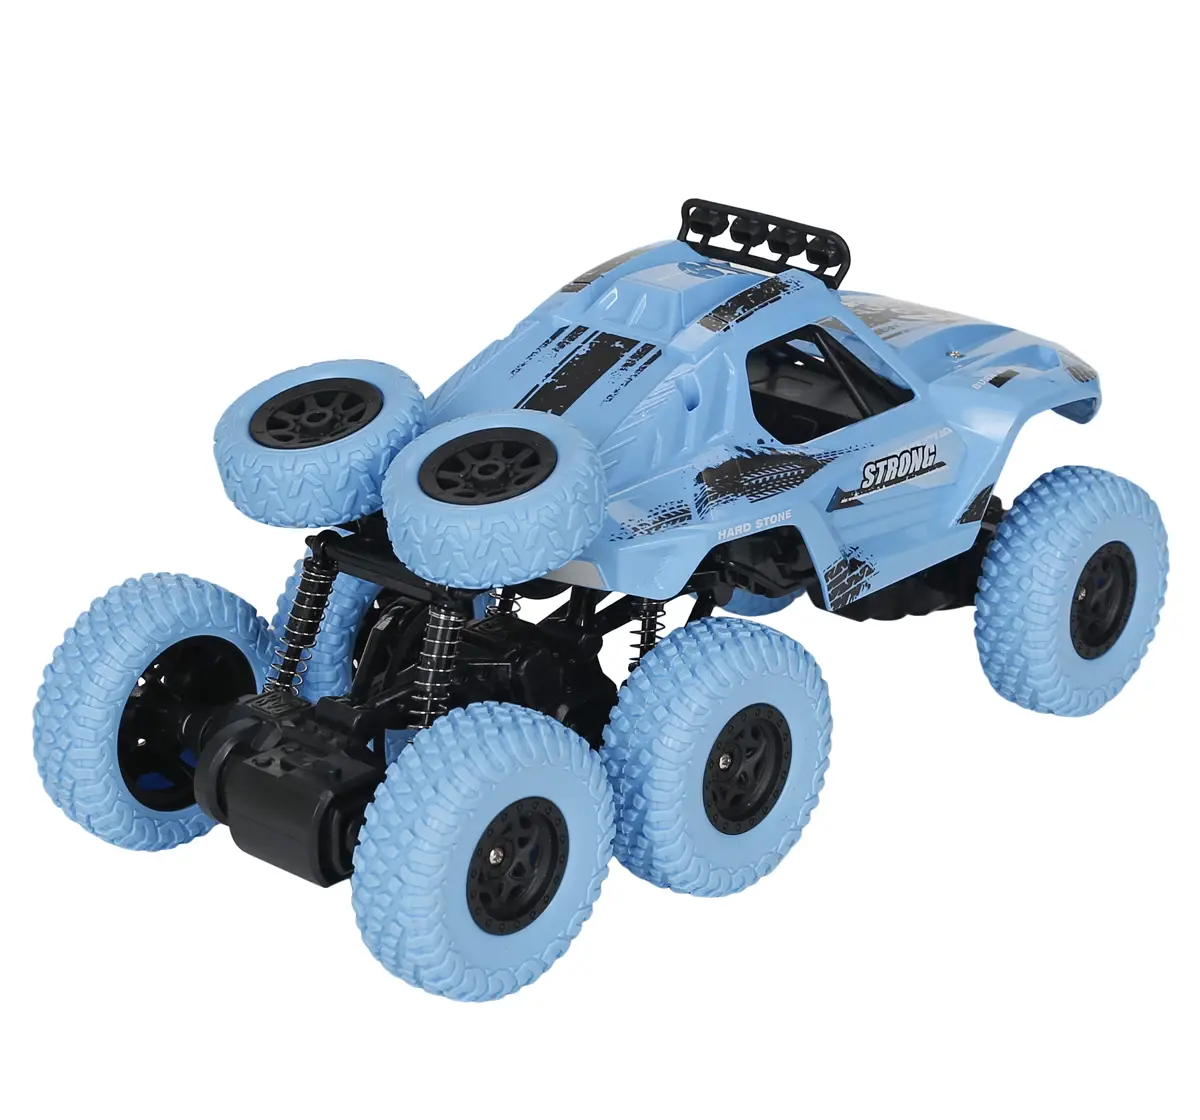 Ralleyz 1:20 2.4GHz 4 Wheel Drive Monster Off Roader 6X6 Rechargeable Remote Control Car, Multicolour, 7Y+